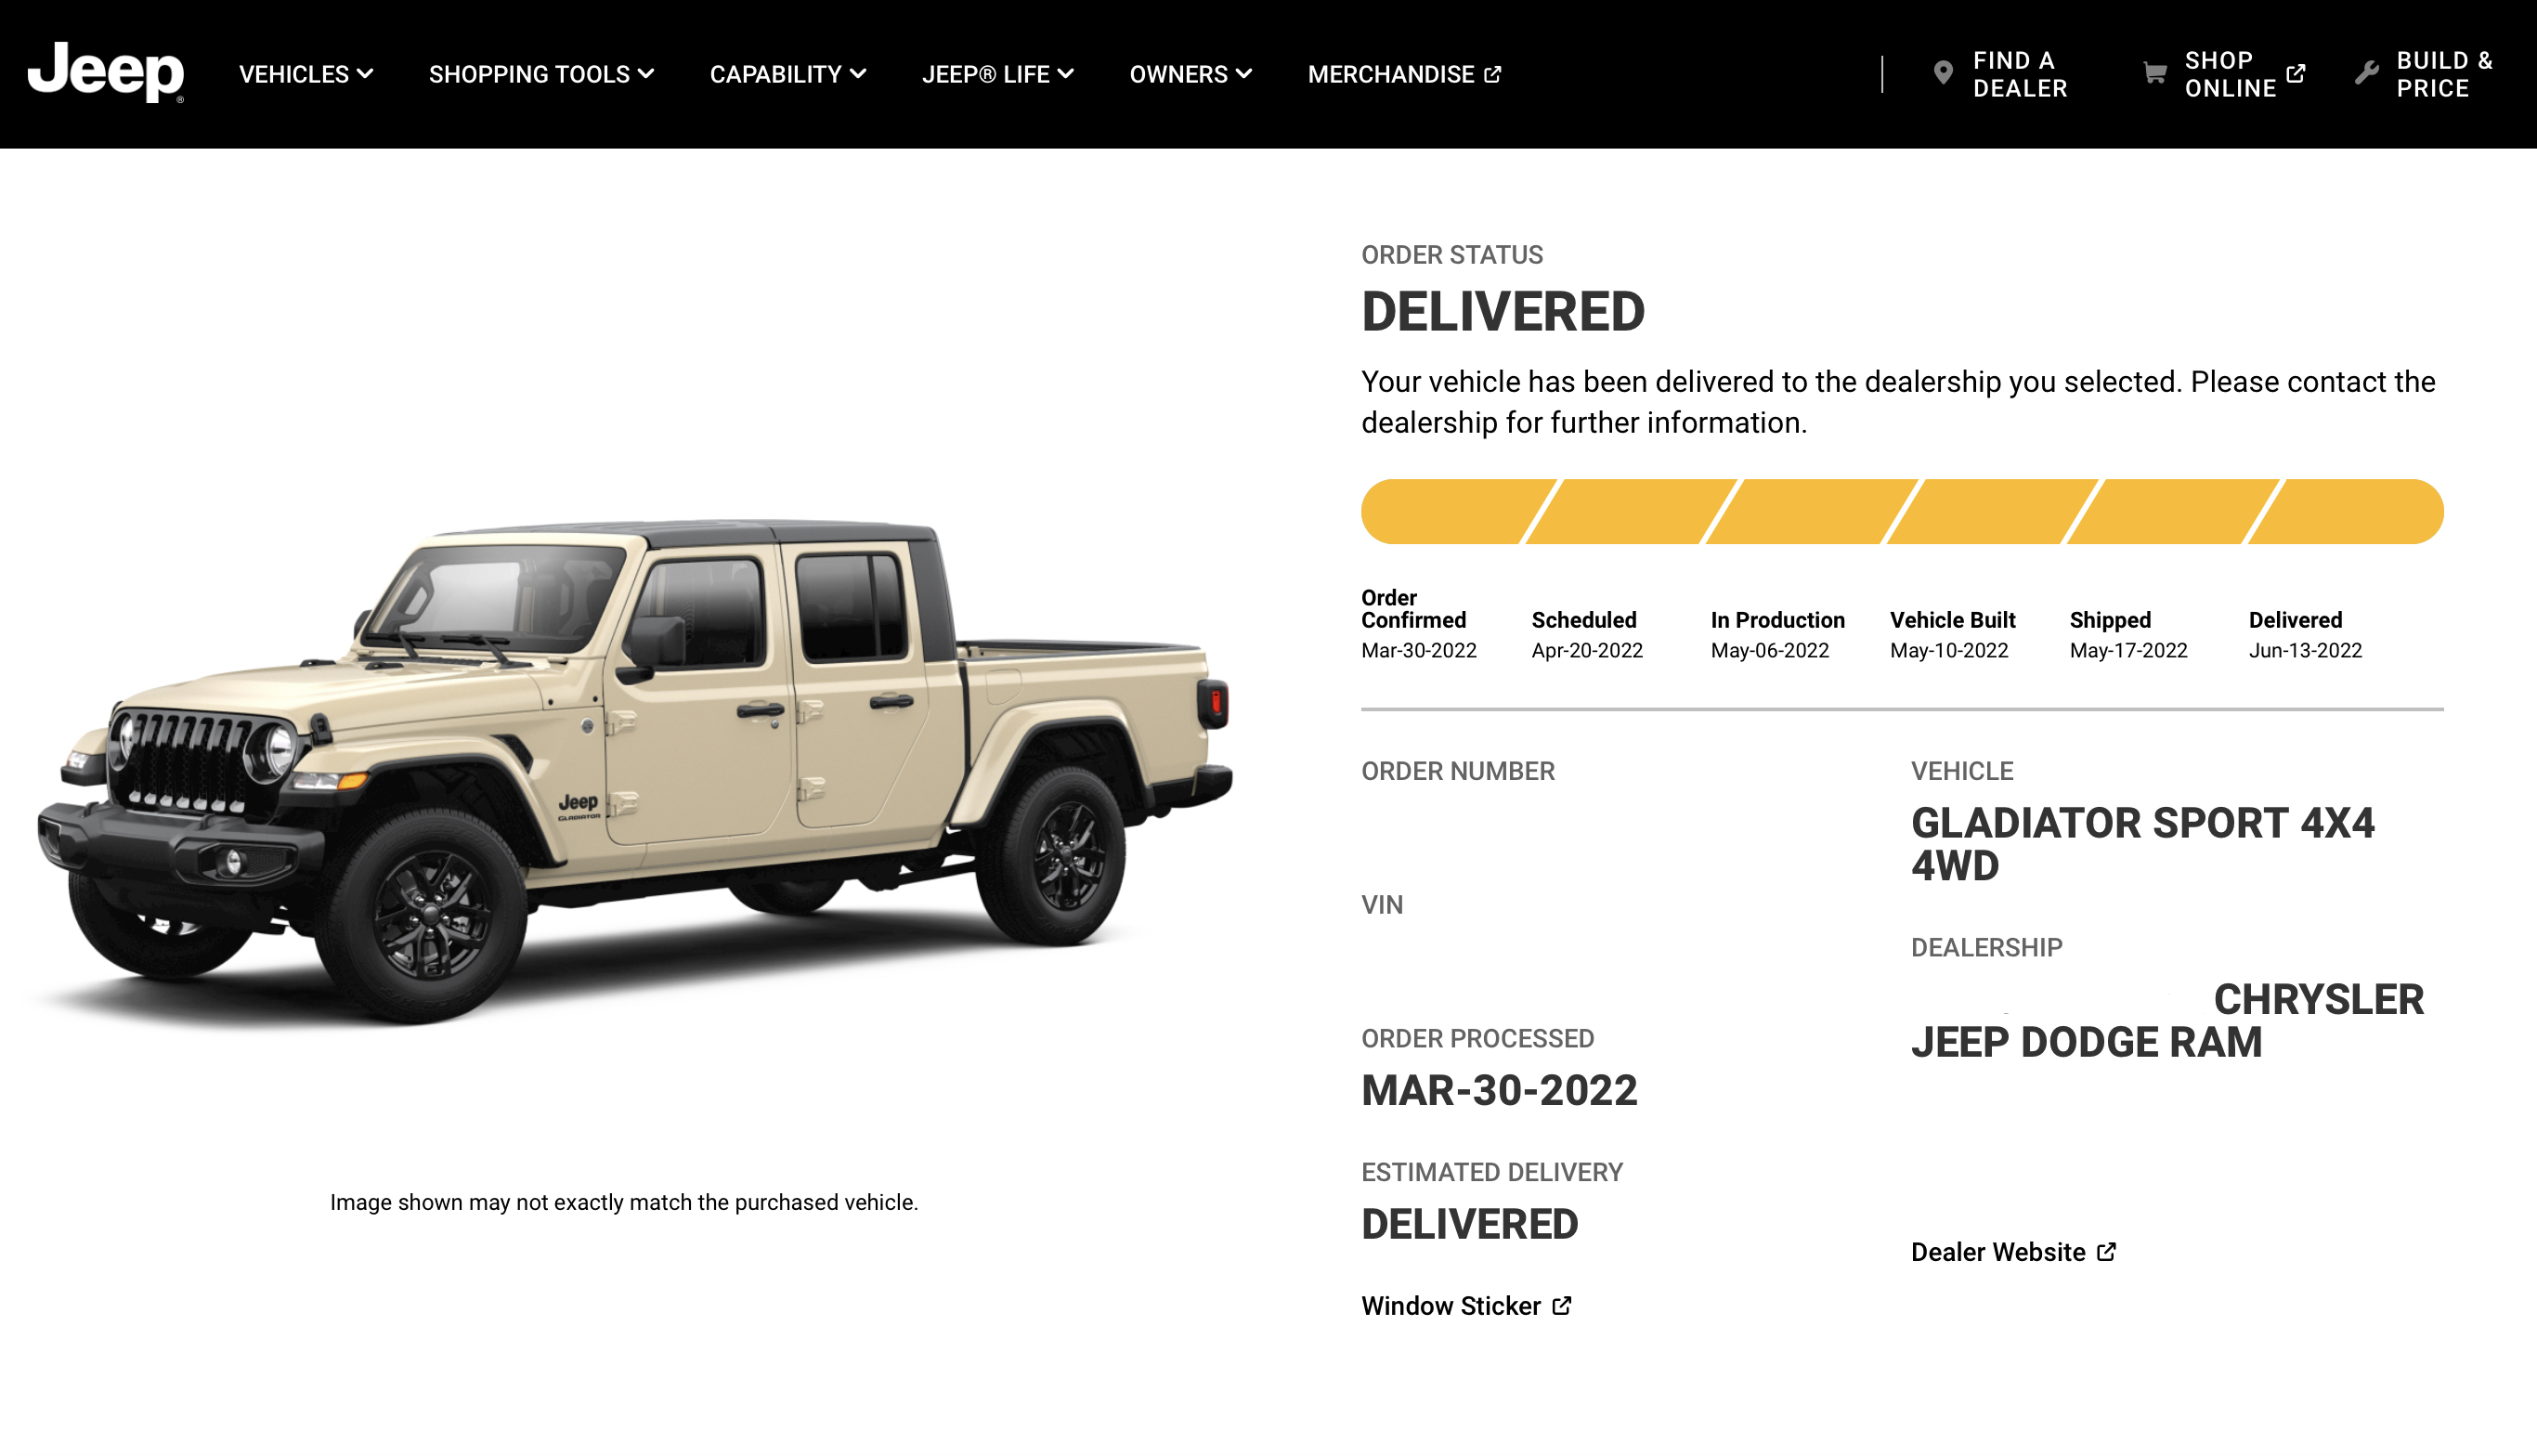 Jeep Gladiator Guide: Gladiator Order, Build, Tracking and Delivery Process EBFC58E9-96FF-4D7C-9665-7776C46A8CFE